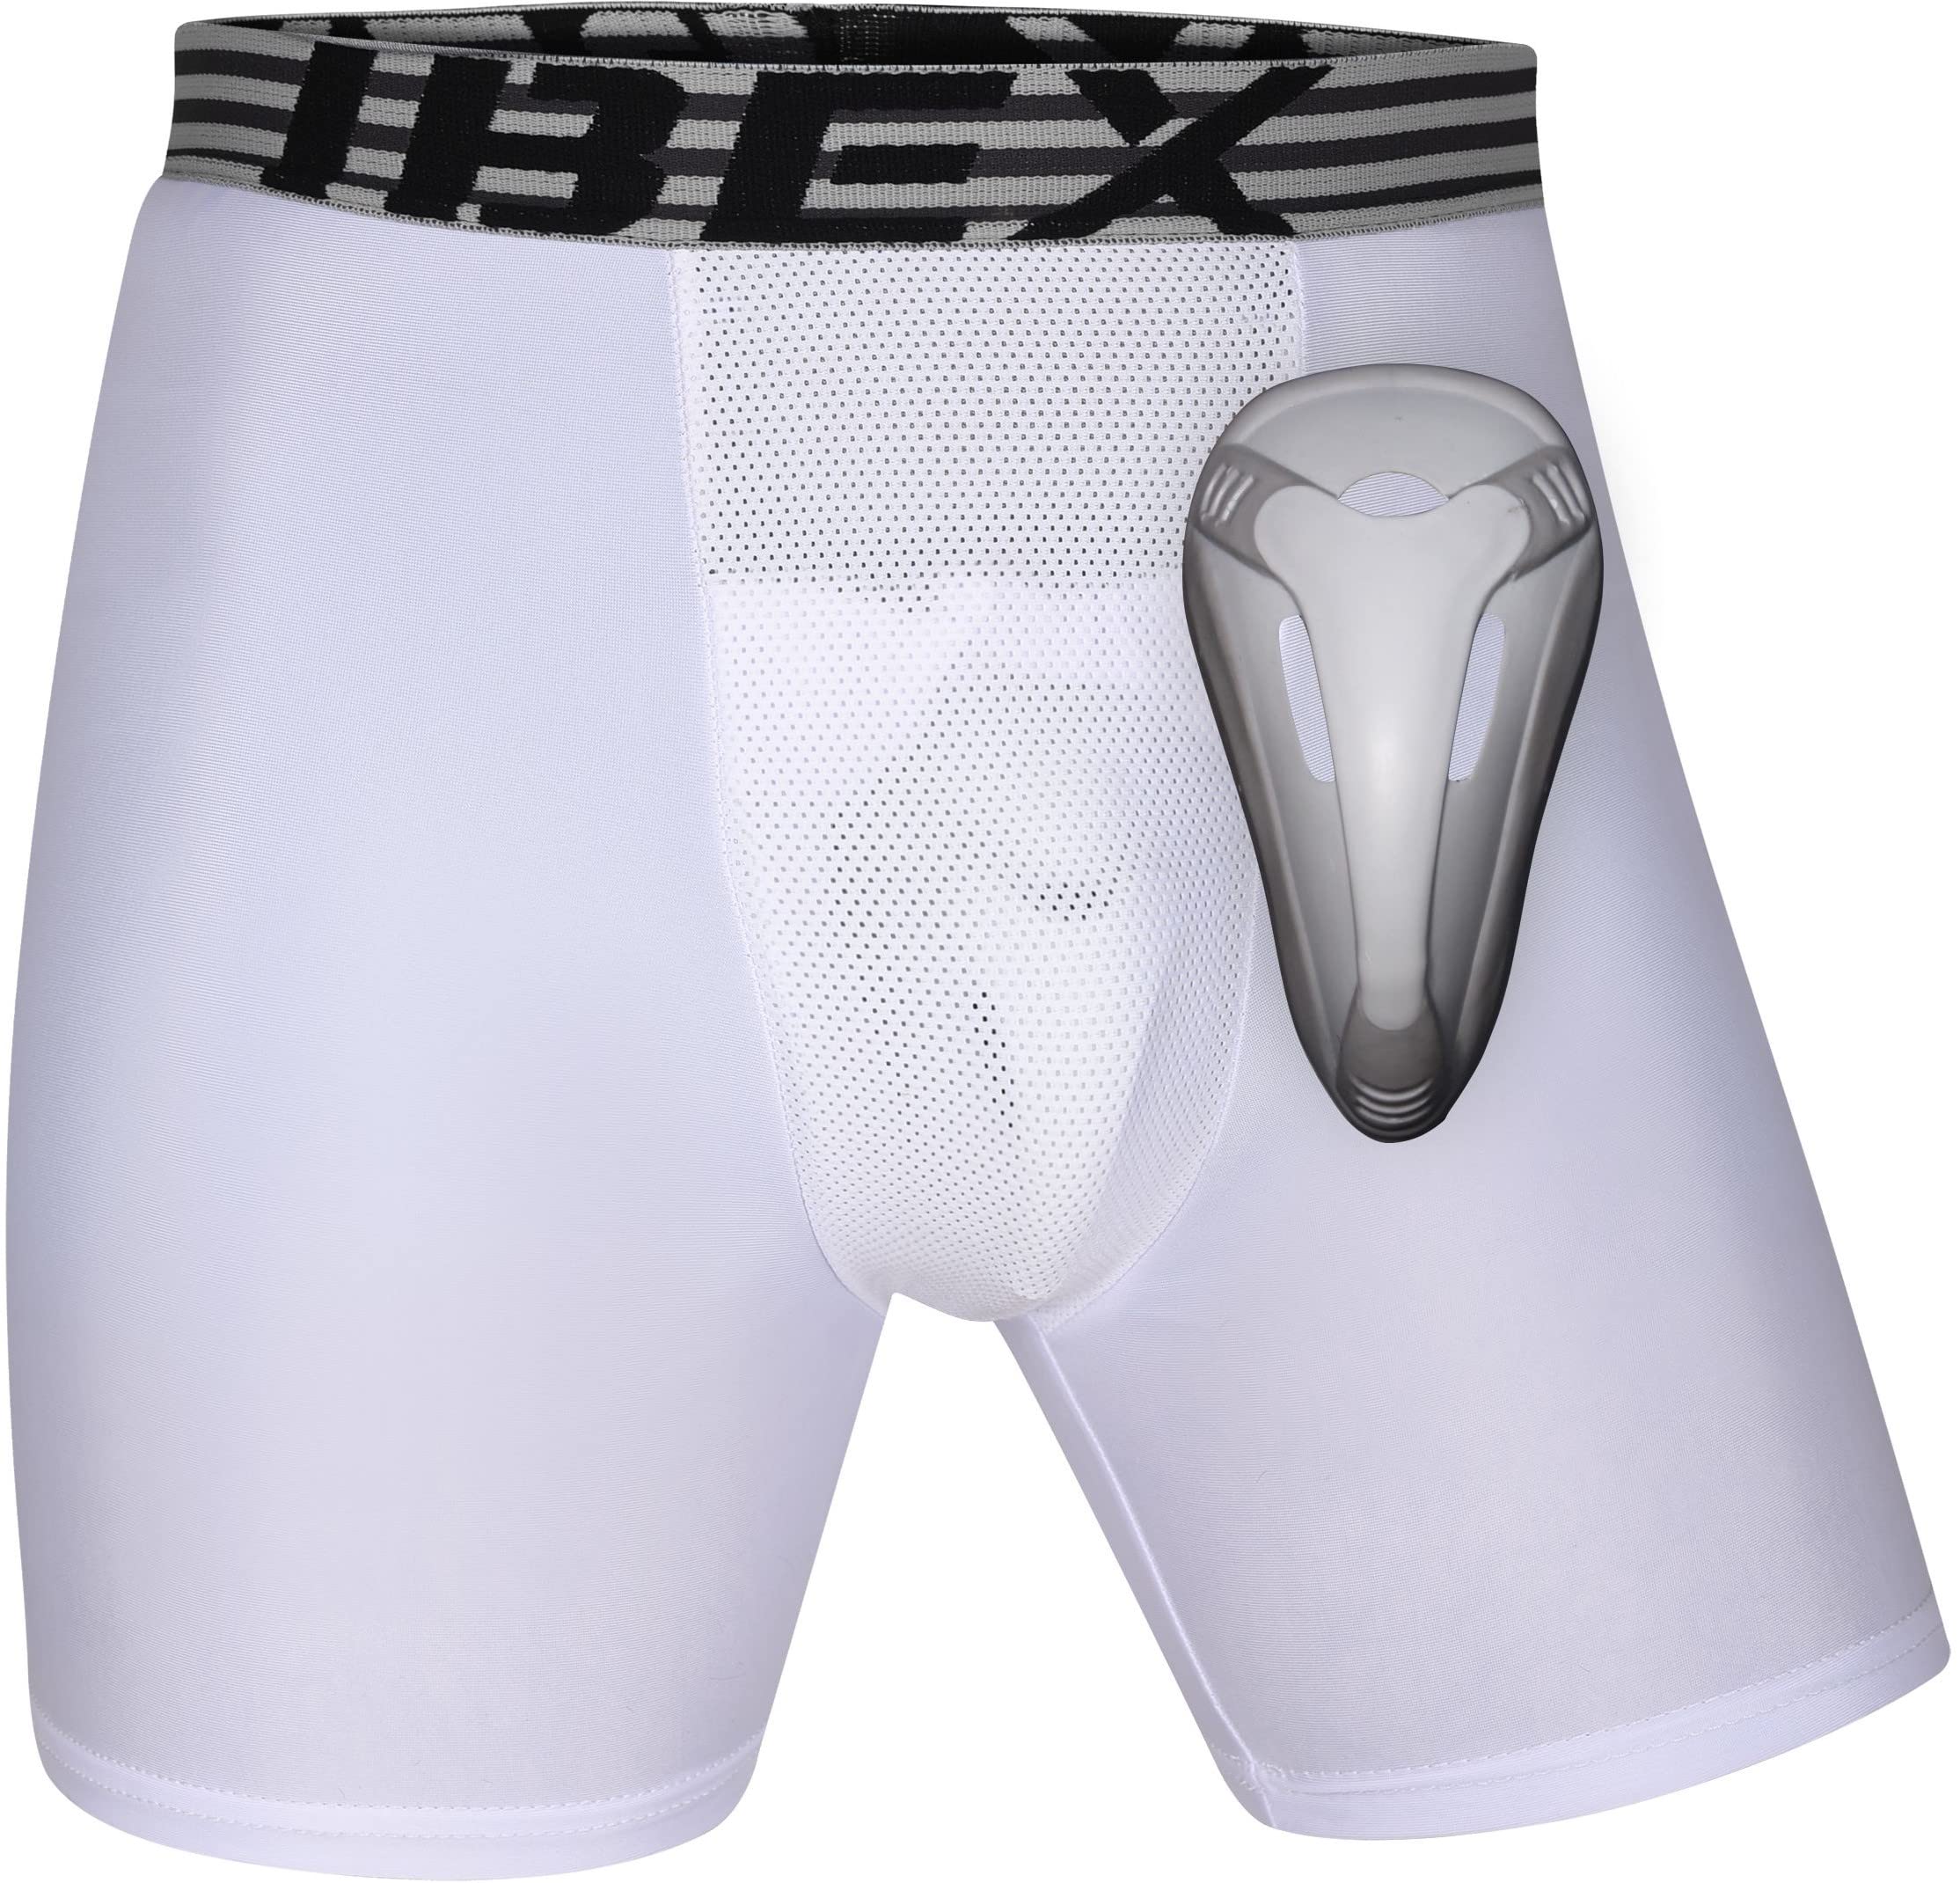 IBEX ATHLETIC Youth Compression Shorts with Protective Cup - Youth Cup  Underwear with Cup, Boys Compression Shorts - (